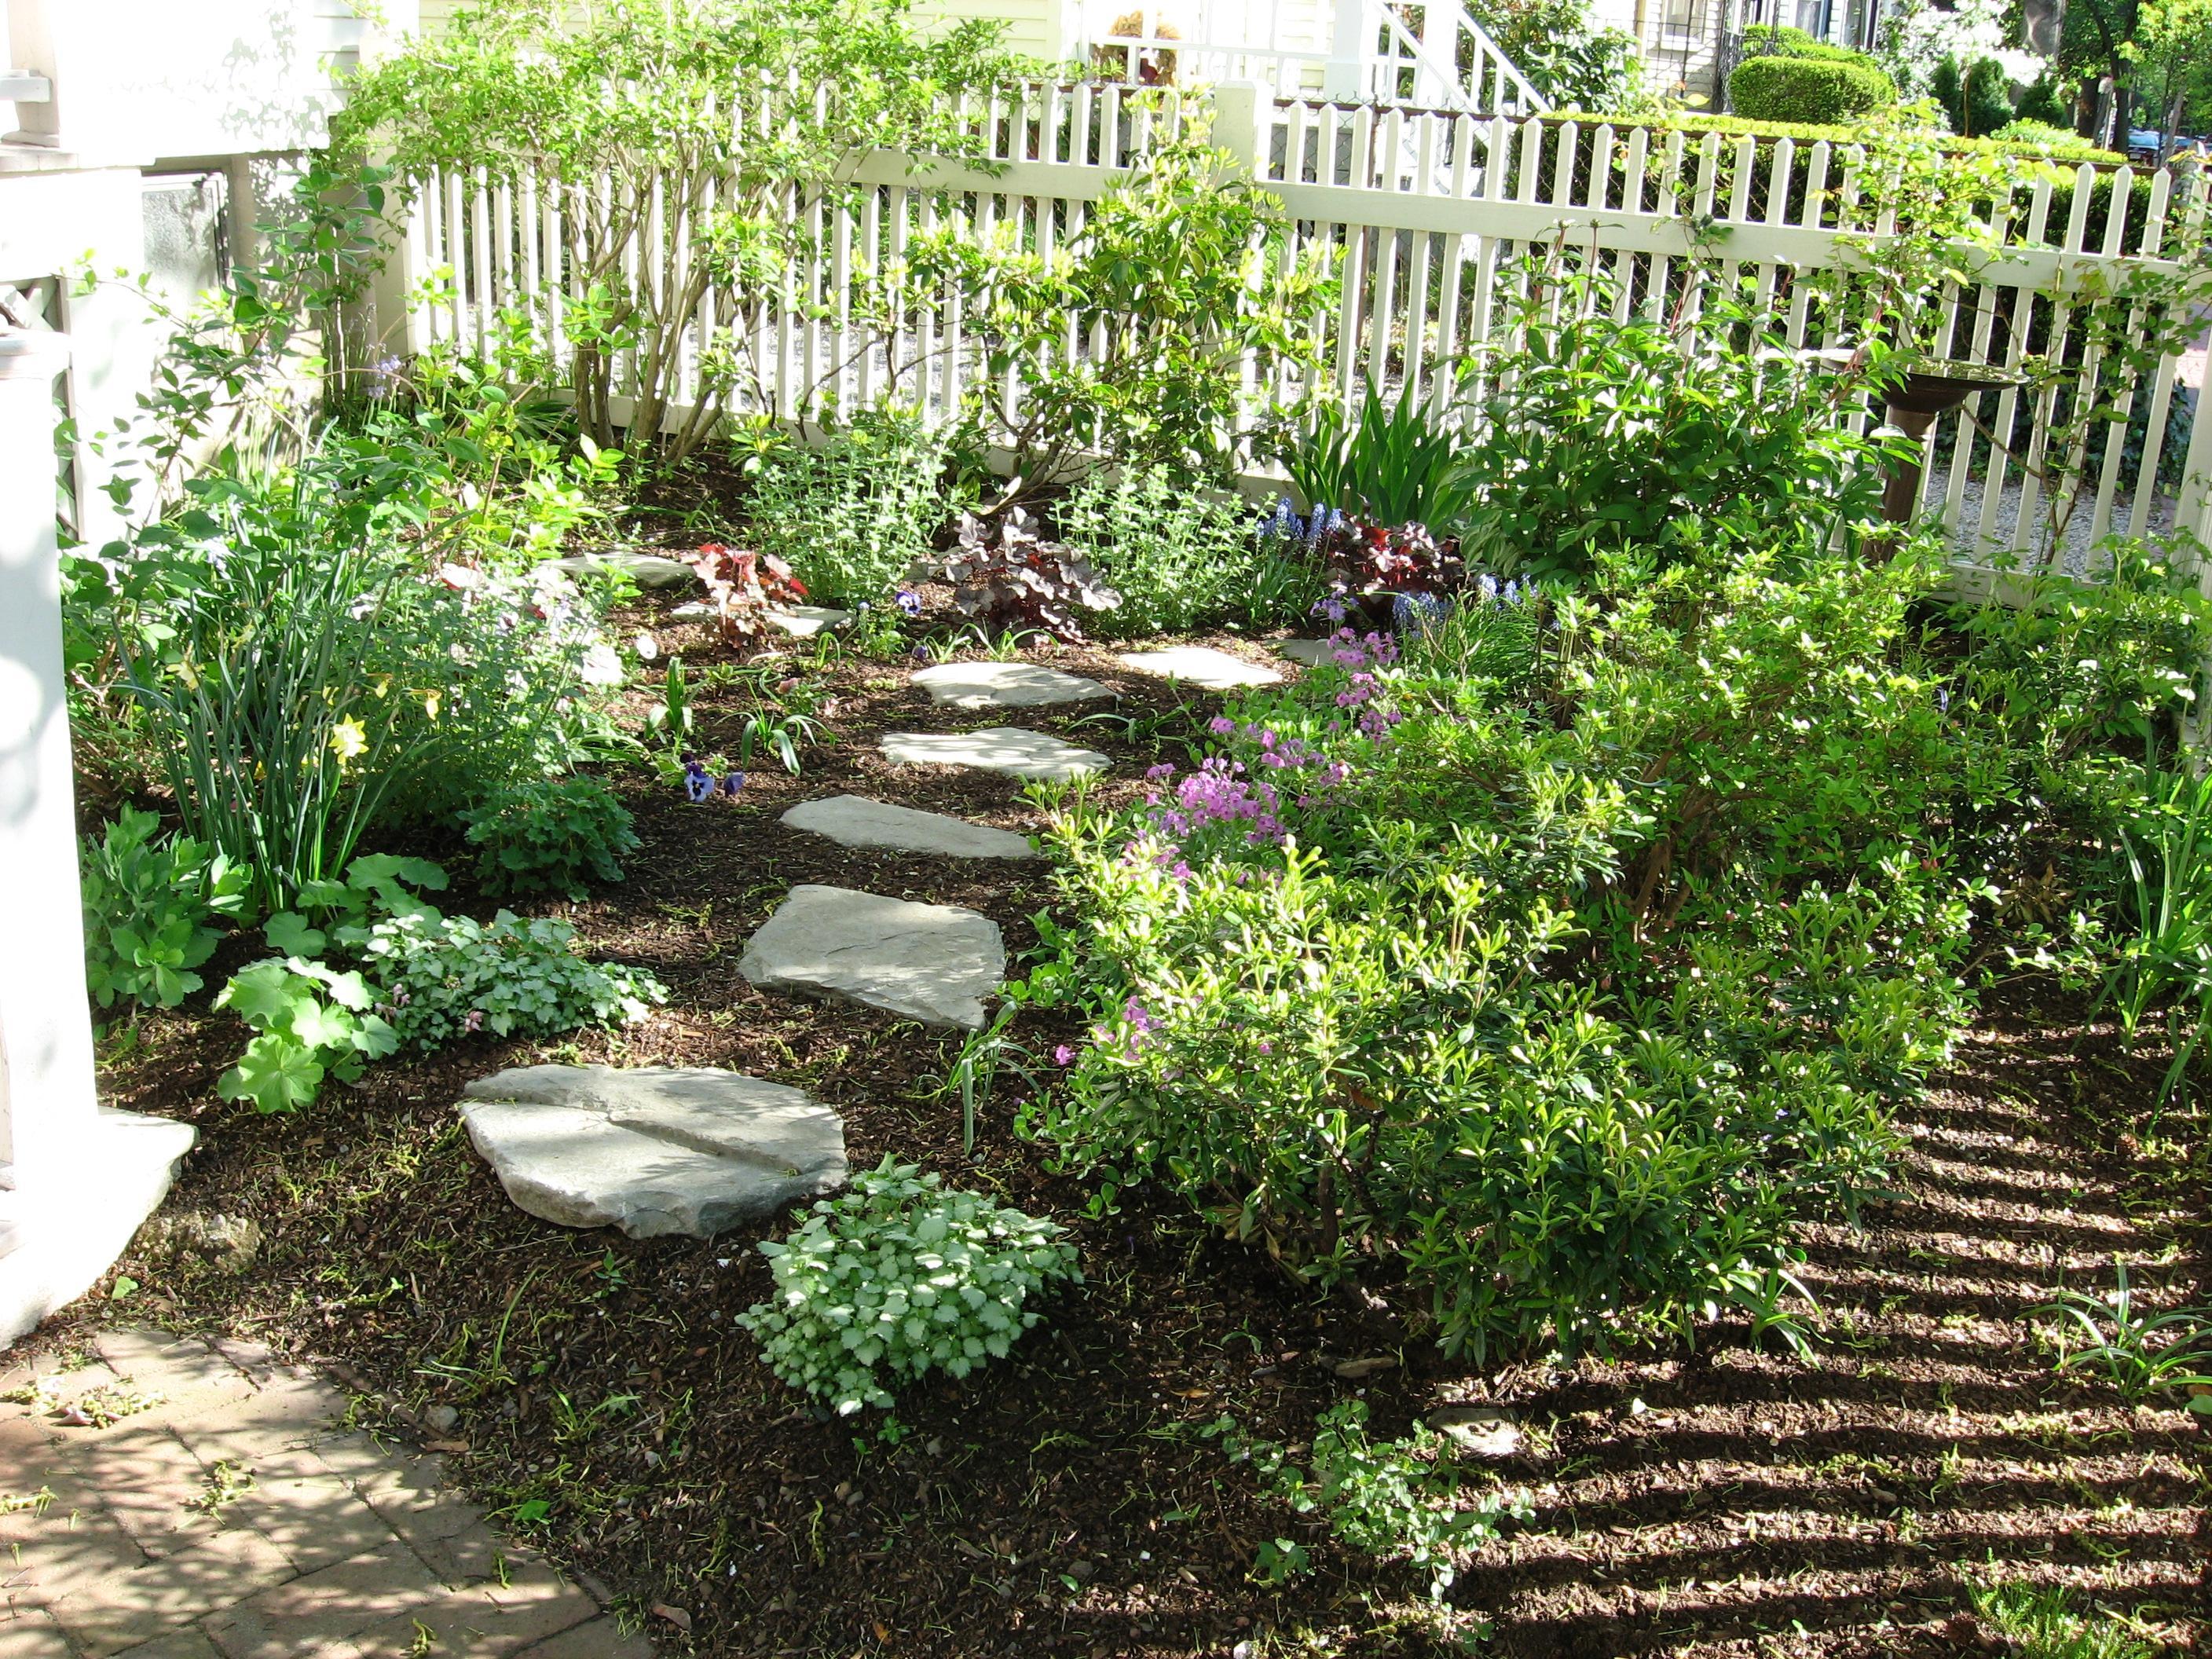 Stepping stones, a bird bath, and interesting plantings create a lovely garden 